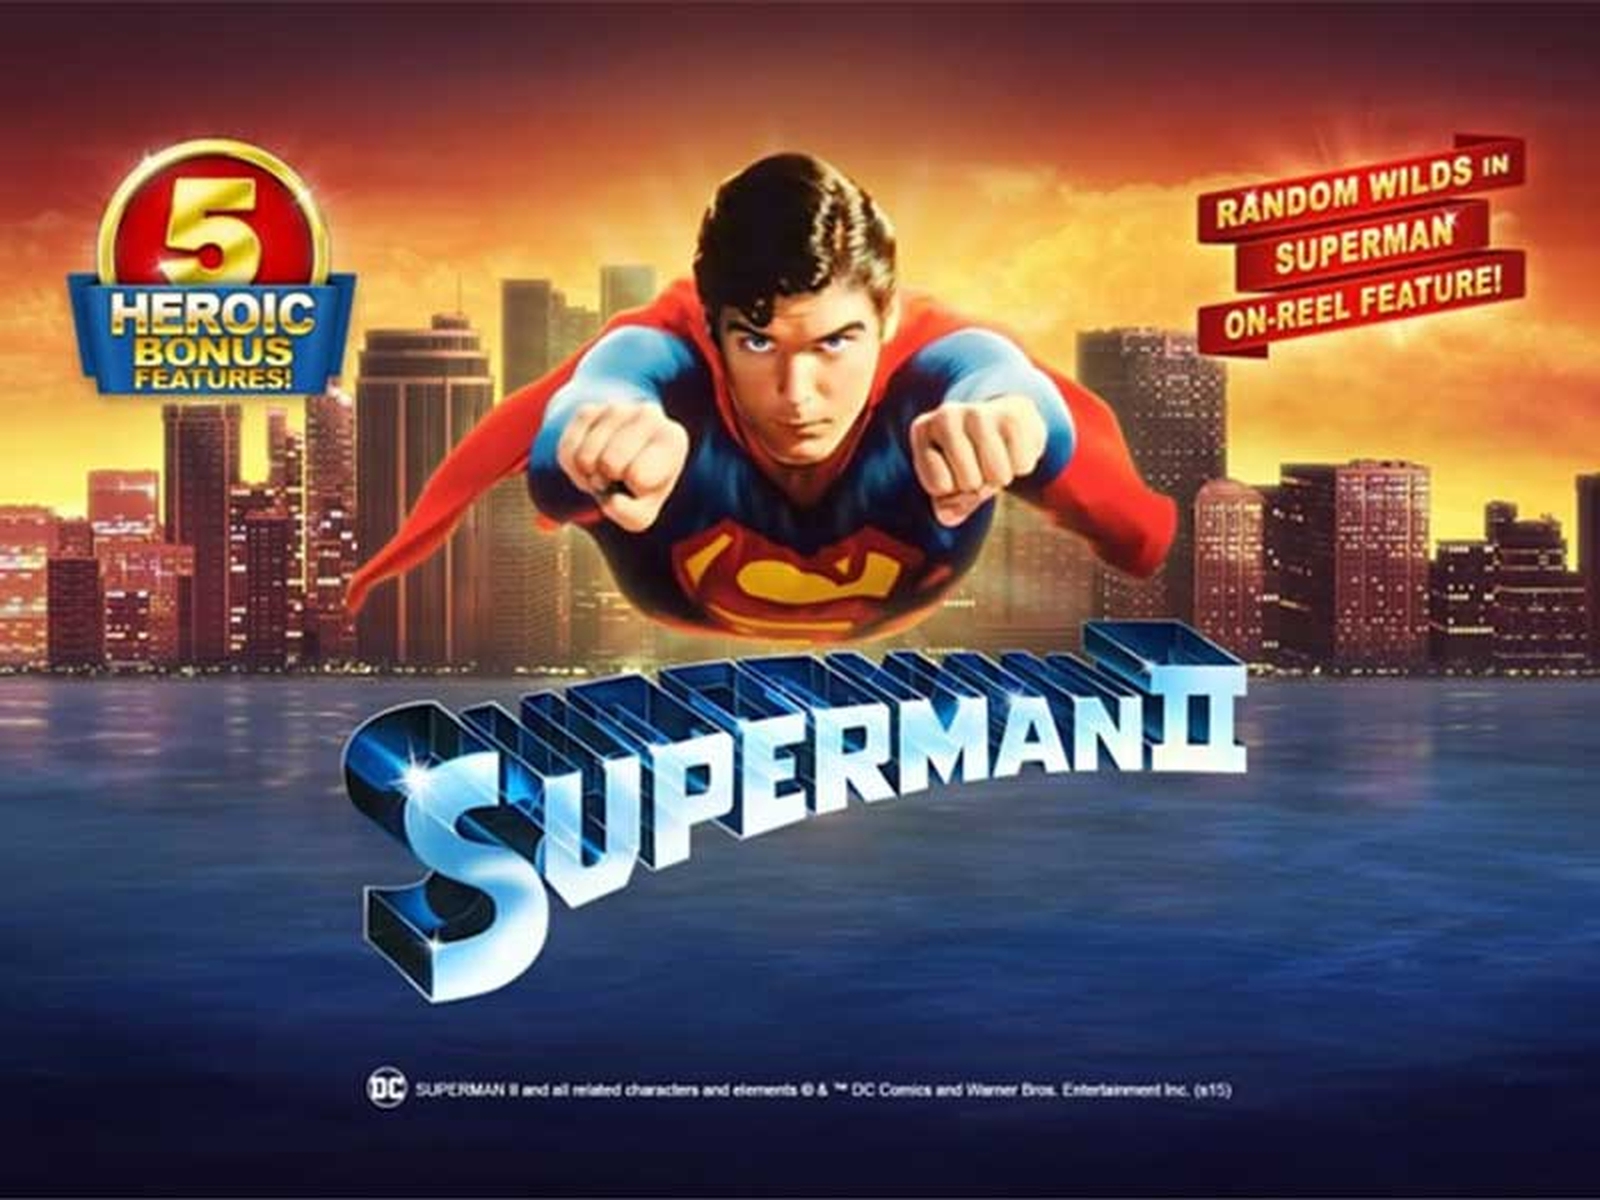 The Superman II Slot Online Slot Demo Game by Playtech